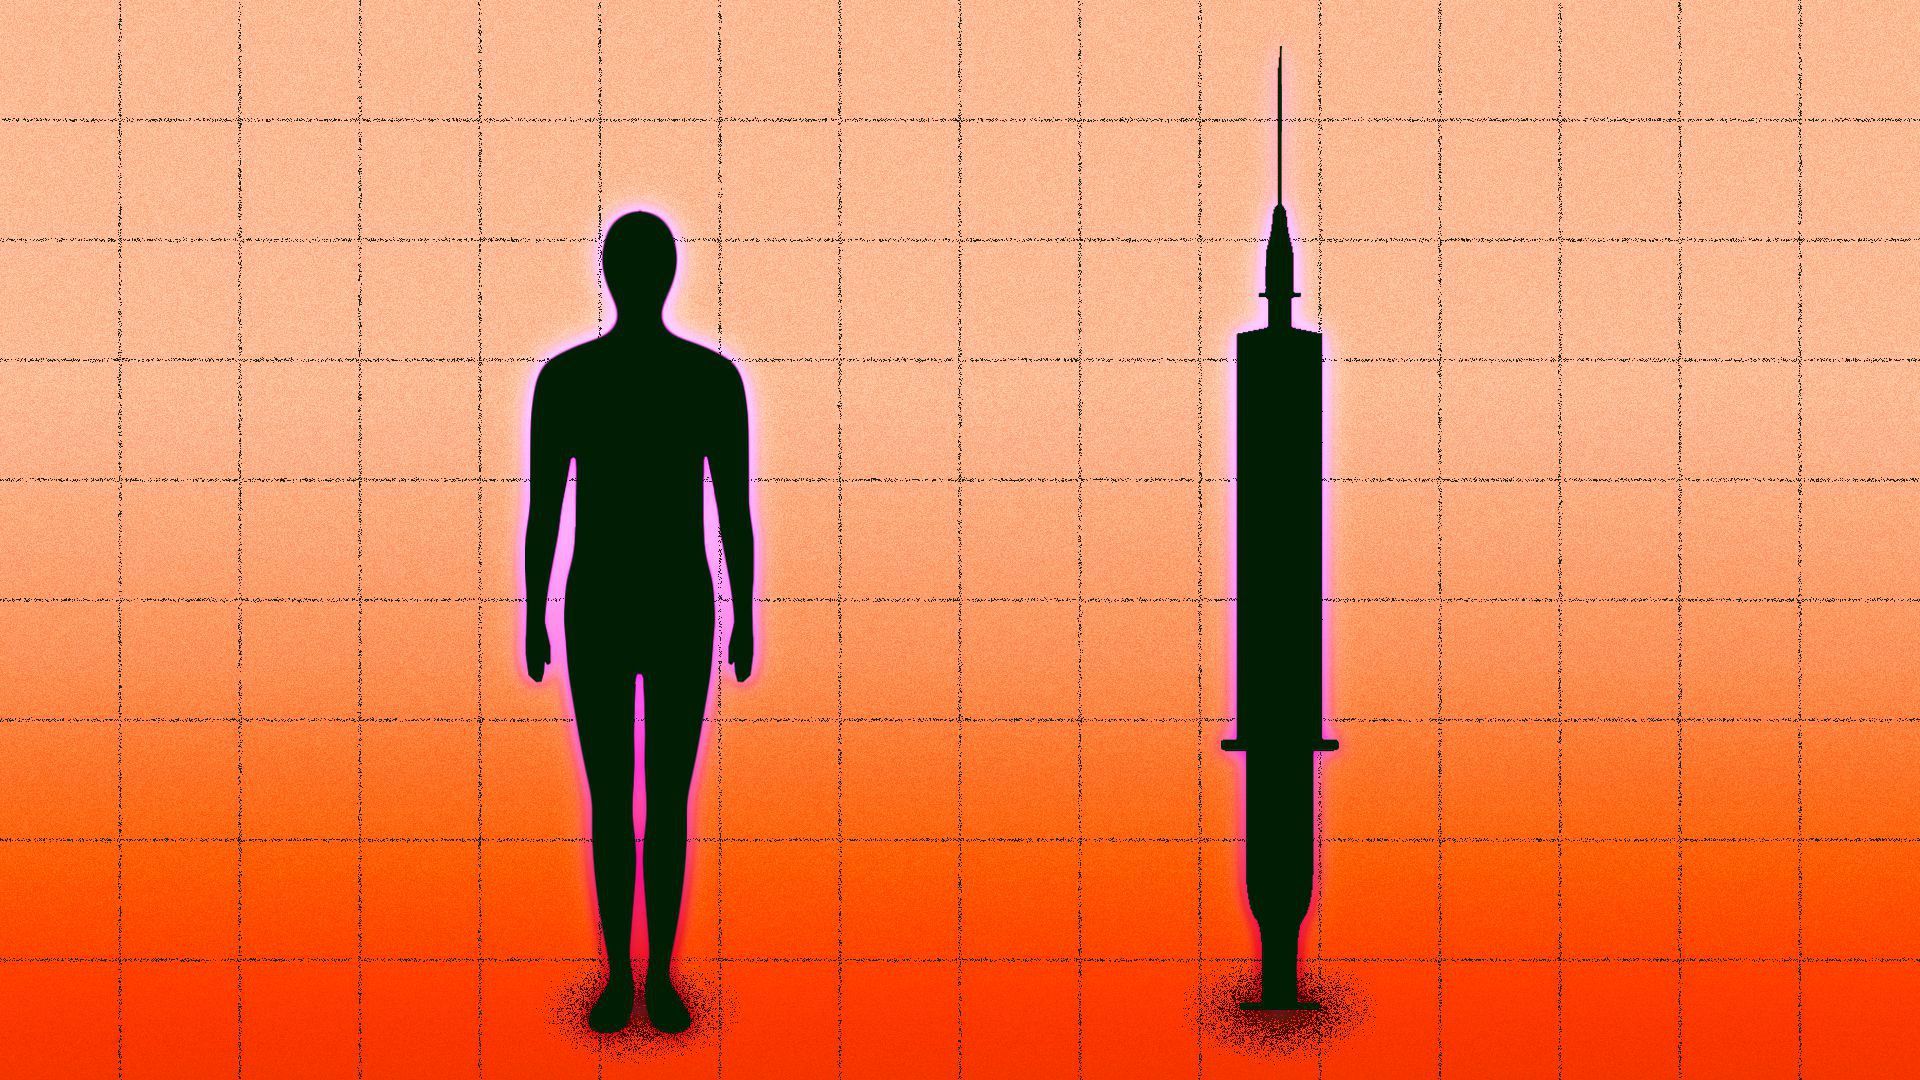 An illustration of a person and a syringe side by side.